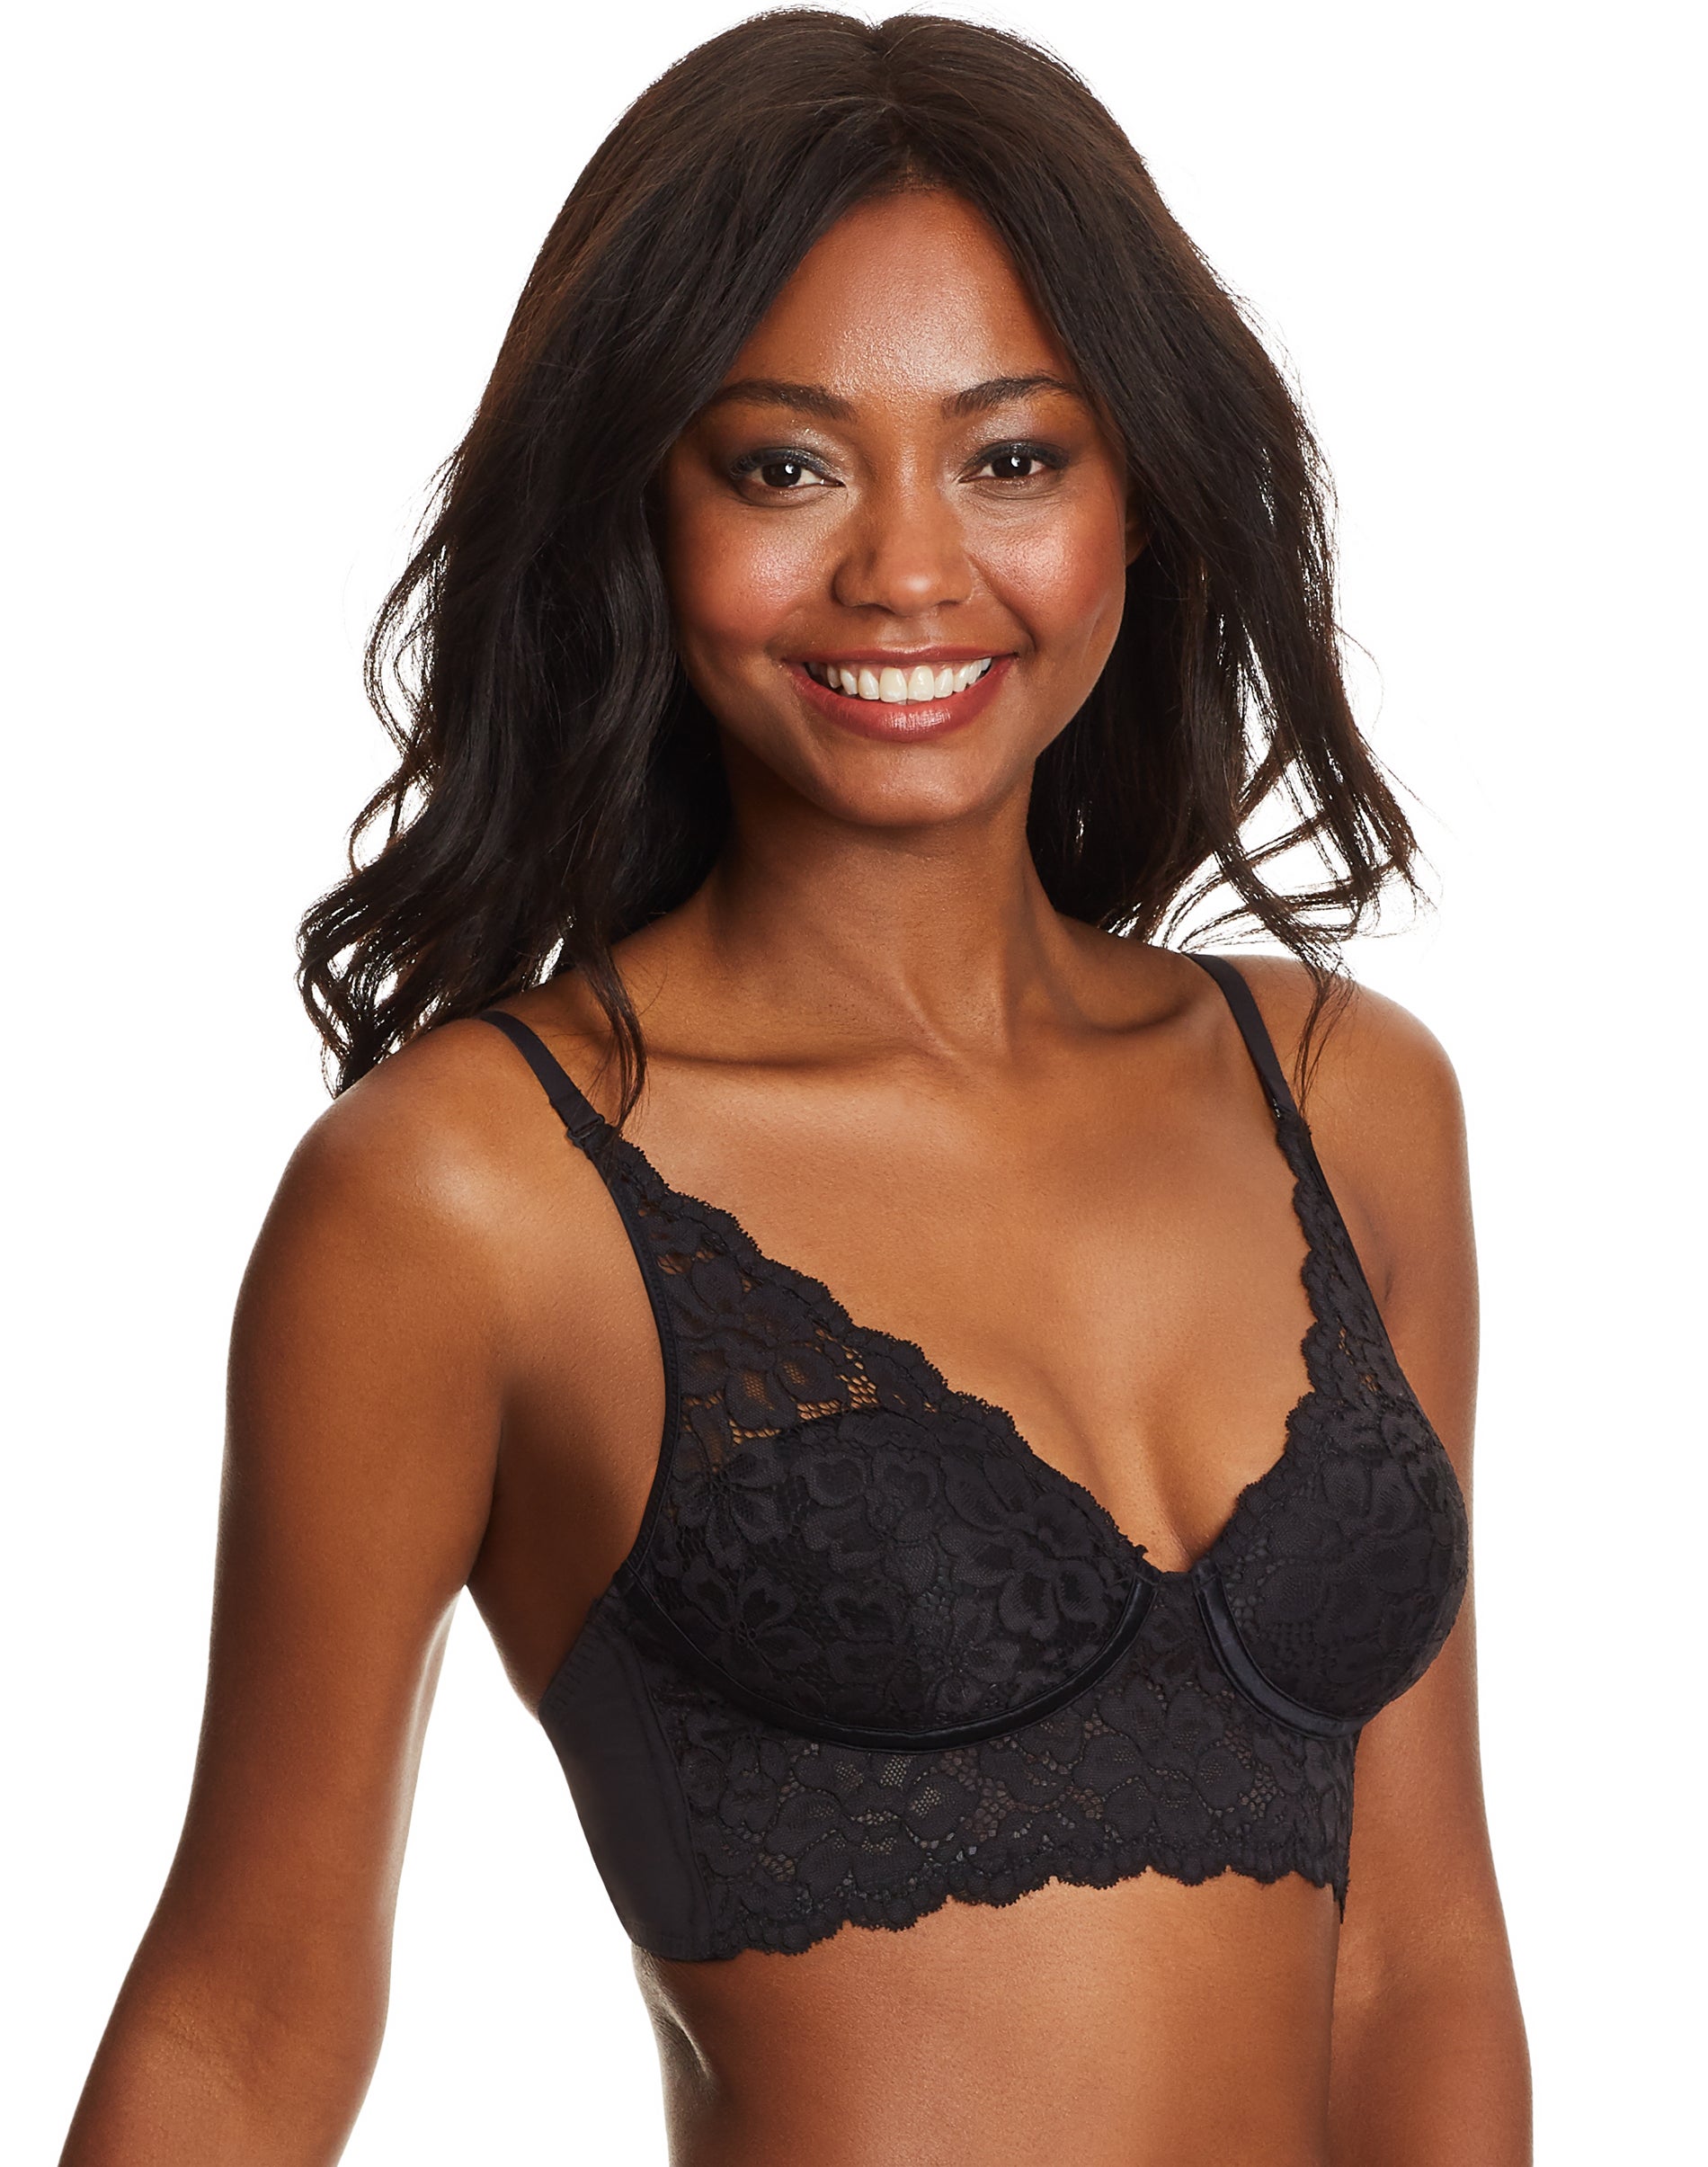 Maidenform Lightly Lined Convertible Lace Bralette Black 34C Women's - image 1 of 5